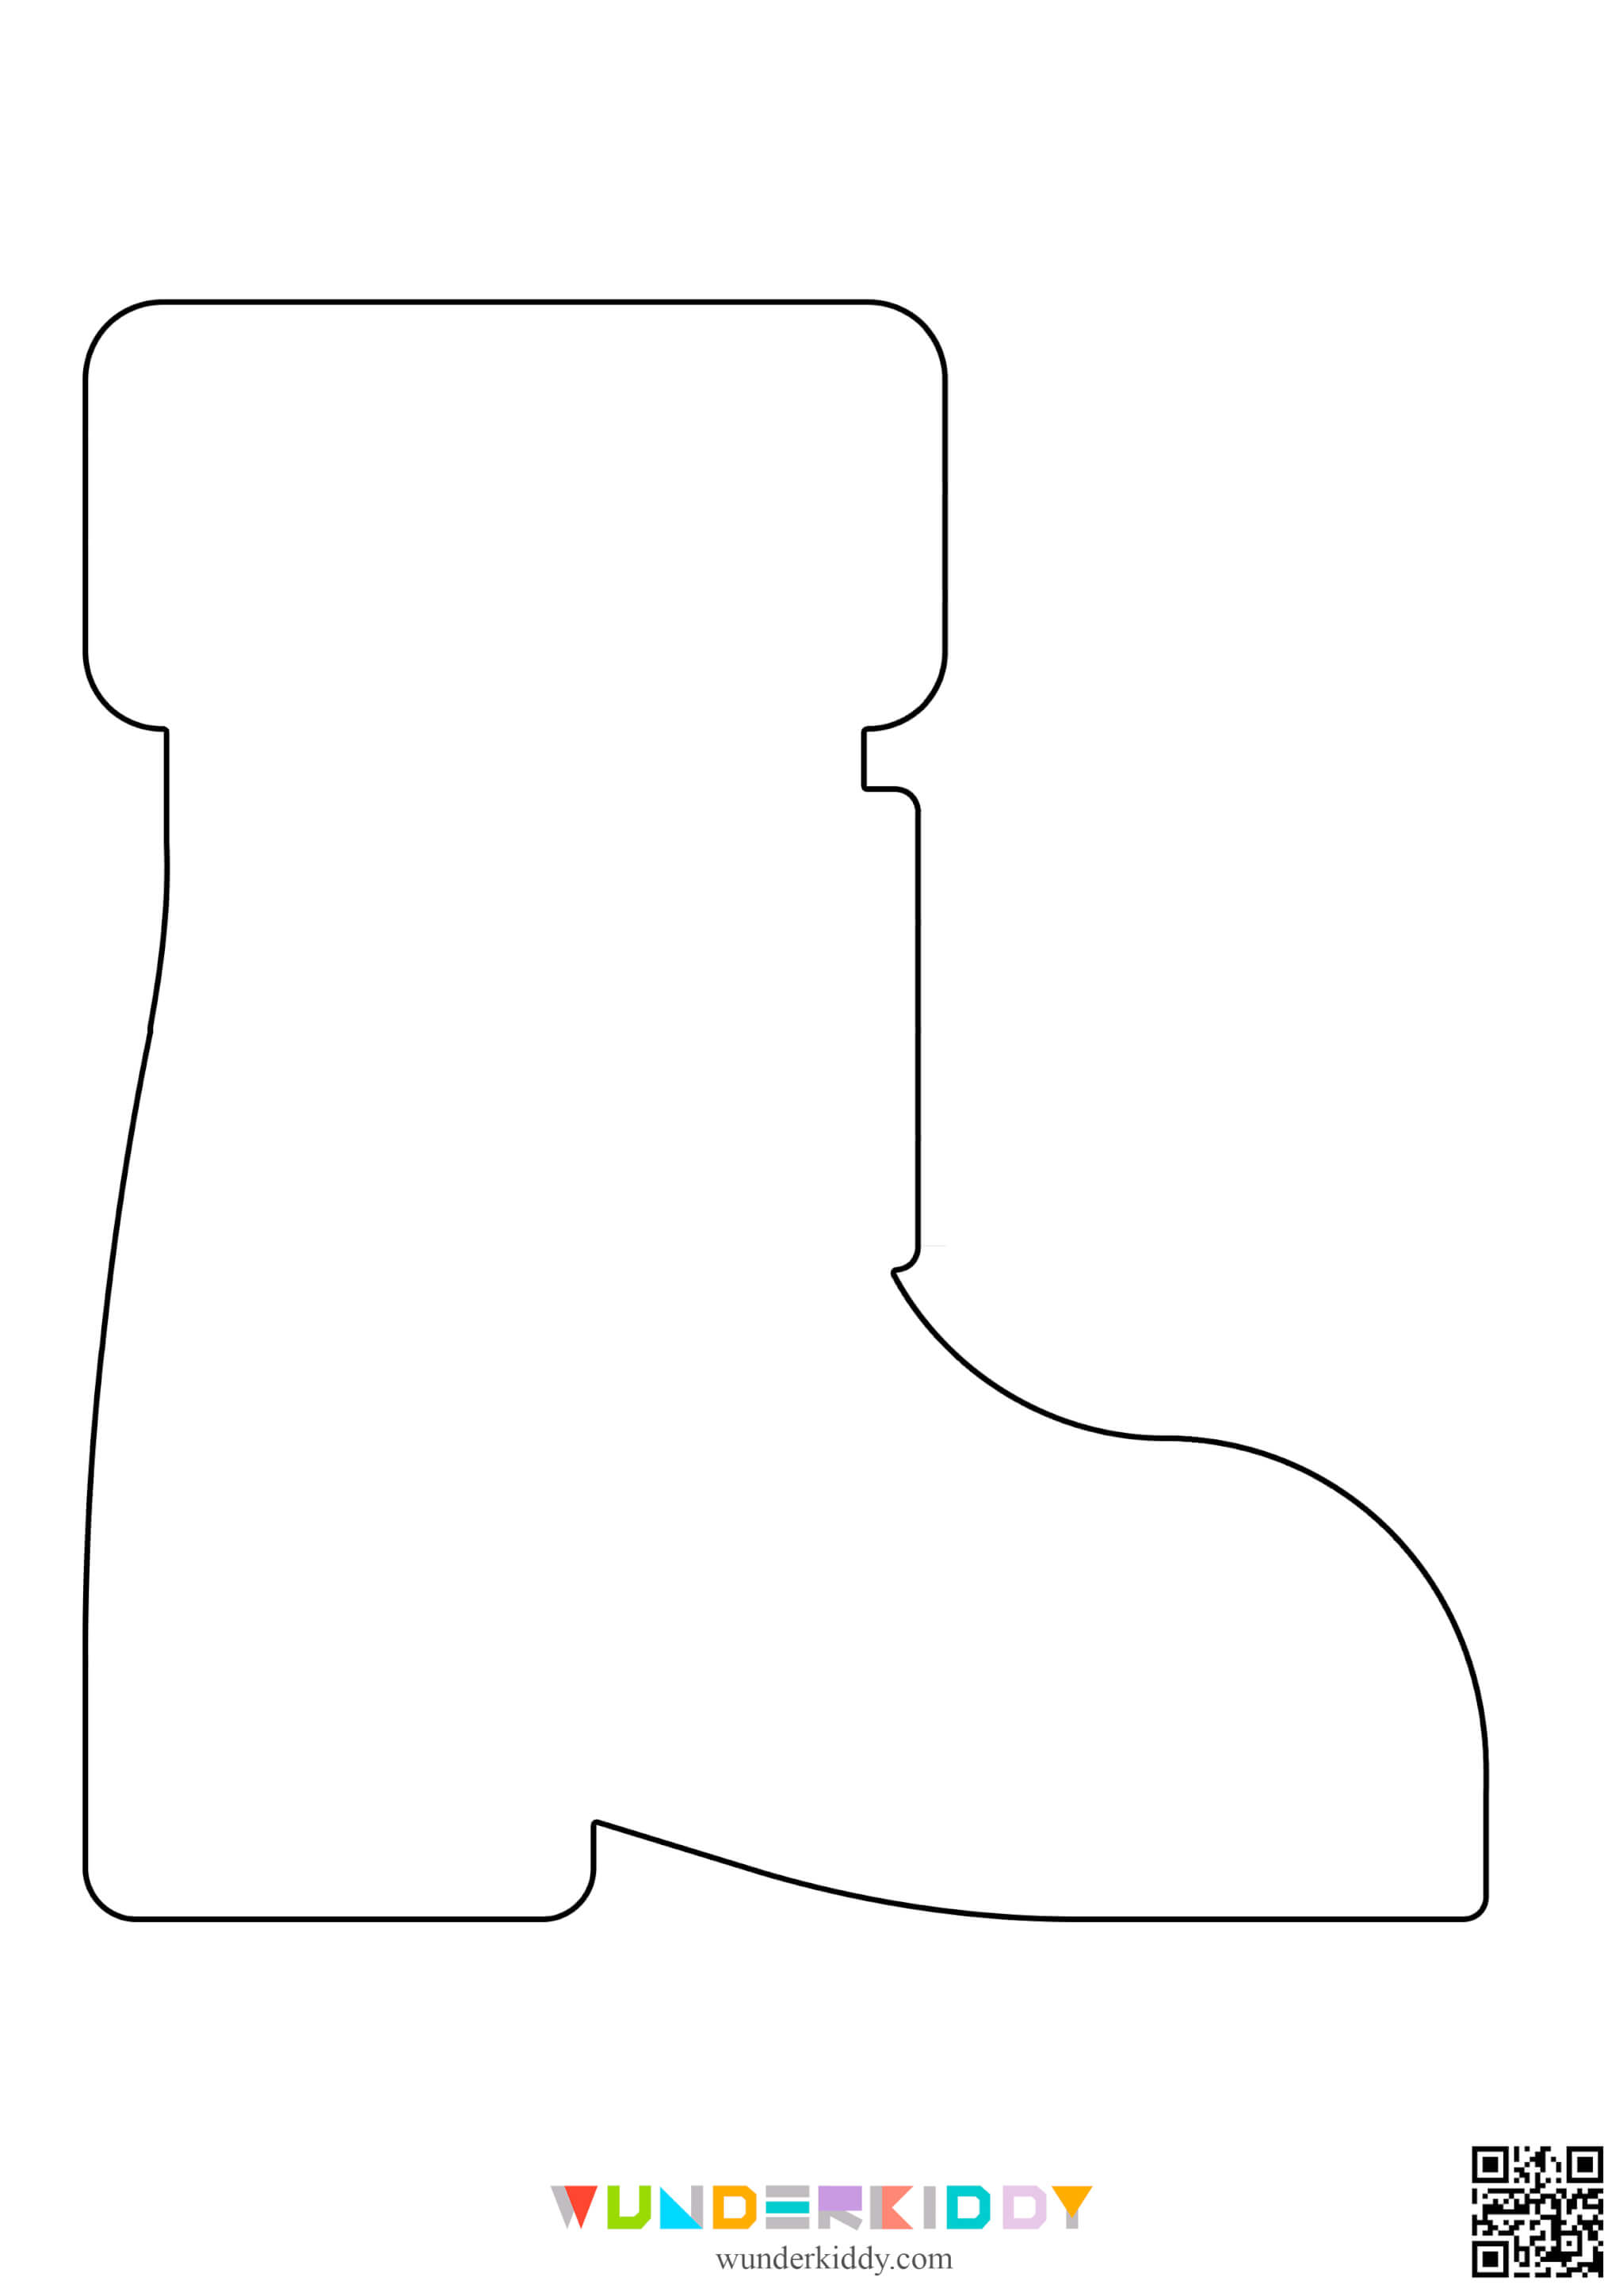 Boots Template - Image 6